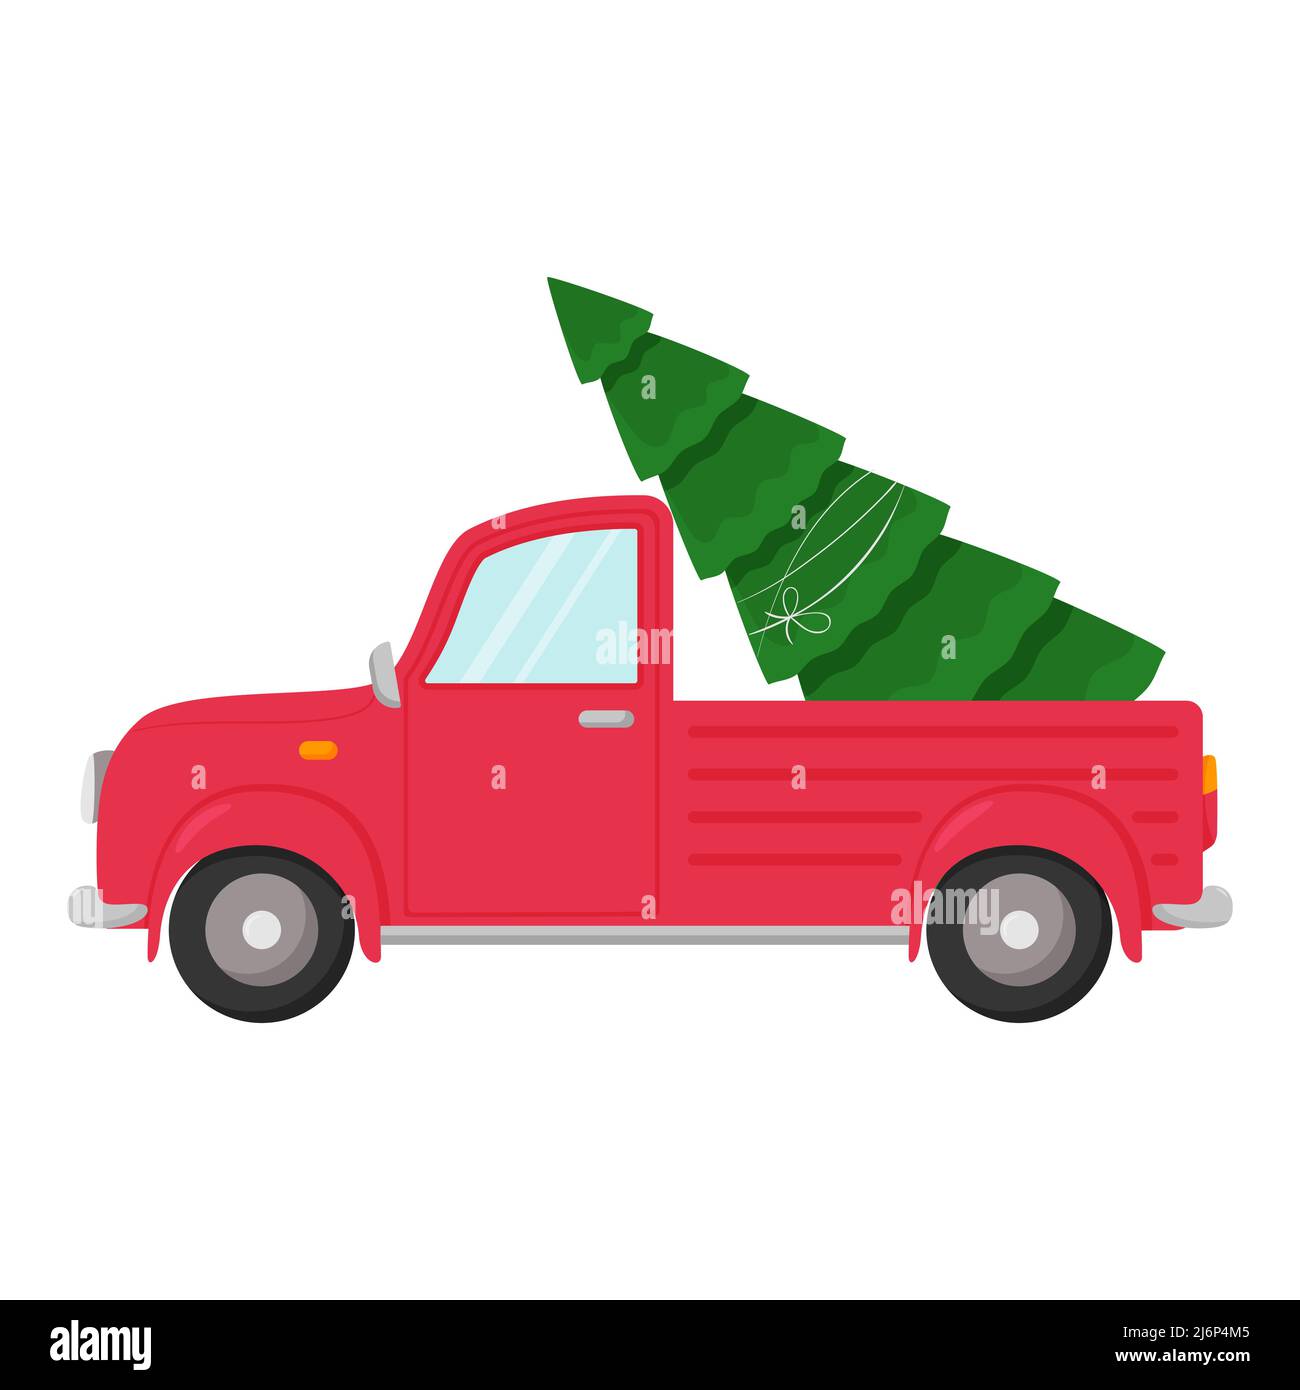 Car with a Christmas tree on the roof. Illustration in a flat style isolated on a white background. Element of new year and Christmas design Stock Vector